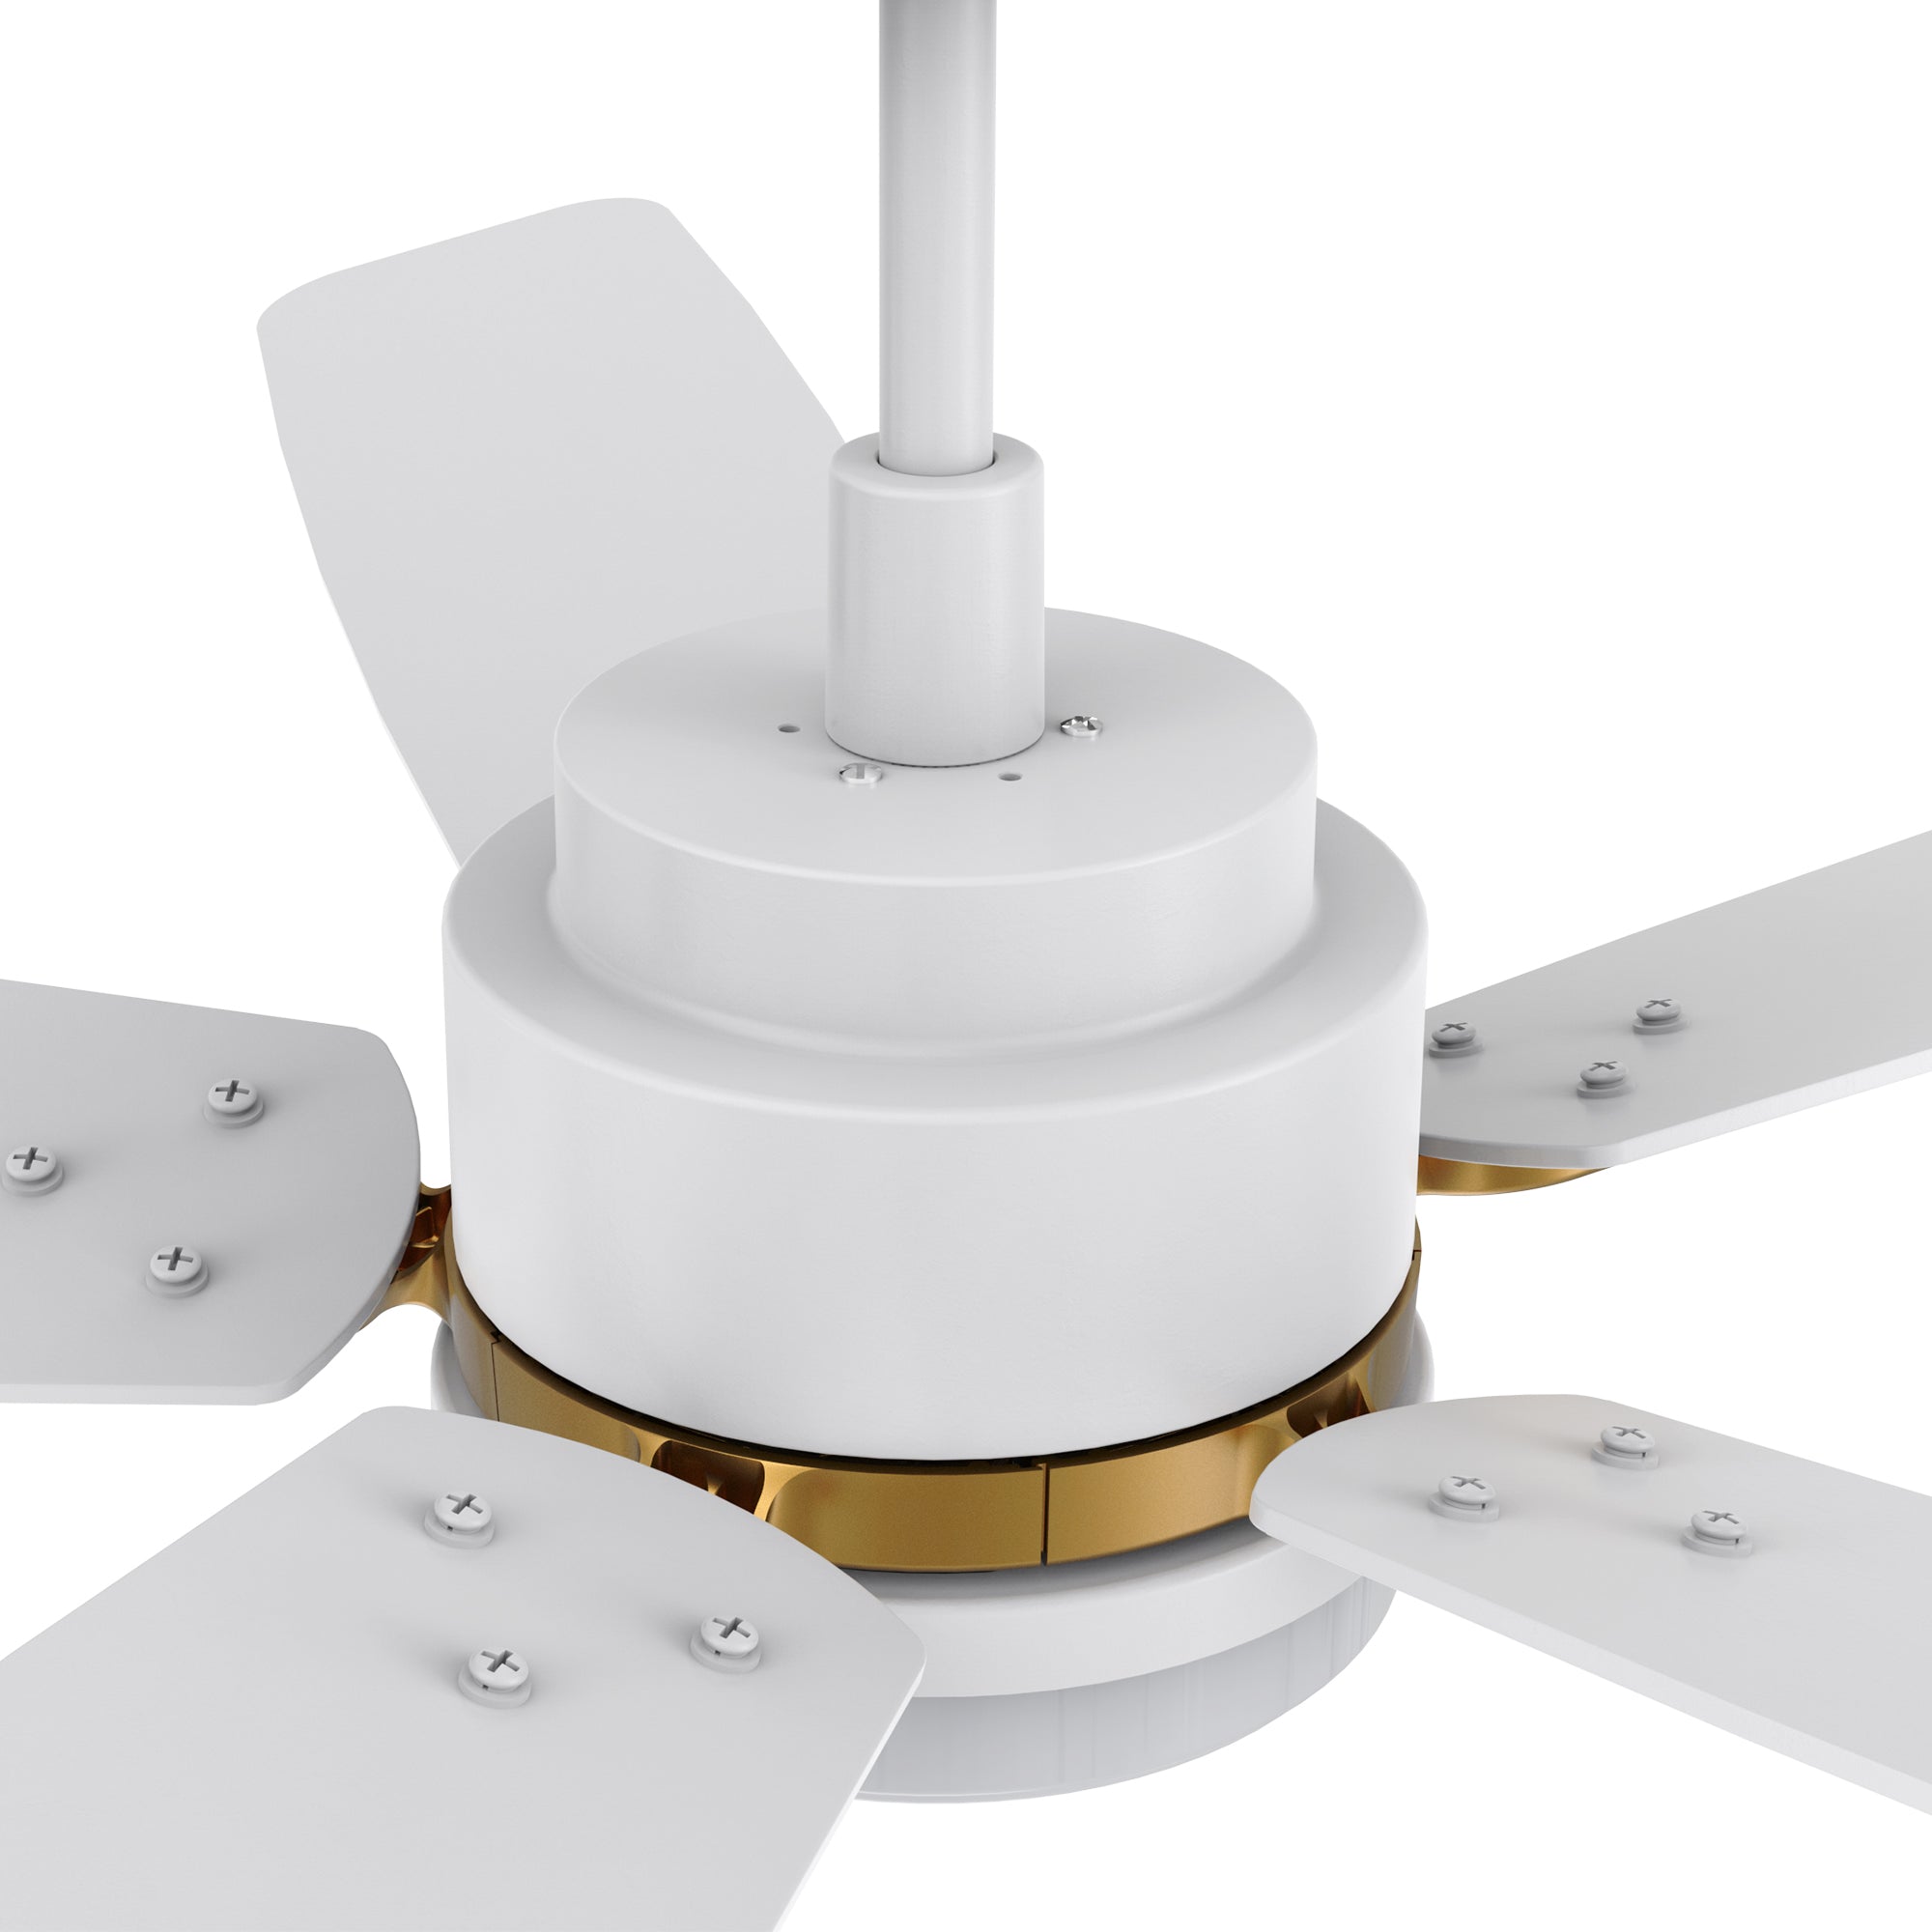 This Havre 52&#39;&#39; smart ceiling fan keeps your space cool, bright, and stylish. It is a soft modern masterpiece perfect for your large indoor living spaces. This Wifi smart ceiling fan is a simplicity designing with White finish, use elegant Plywood blades and has an integrated 4000K LED cool light. The fan features Remote control, Wi-Fi apps, Siri Shortcut and Voice control technology (compatible with Amazon Alexa and Google Home Assistant ) to set fan preferences.